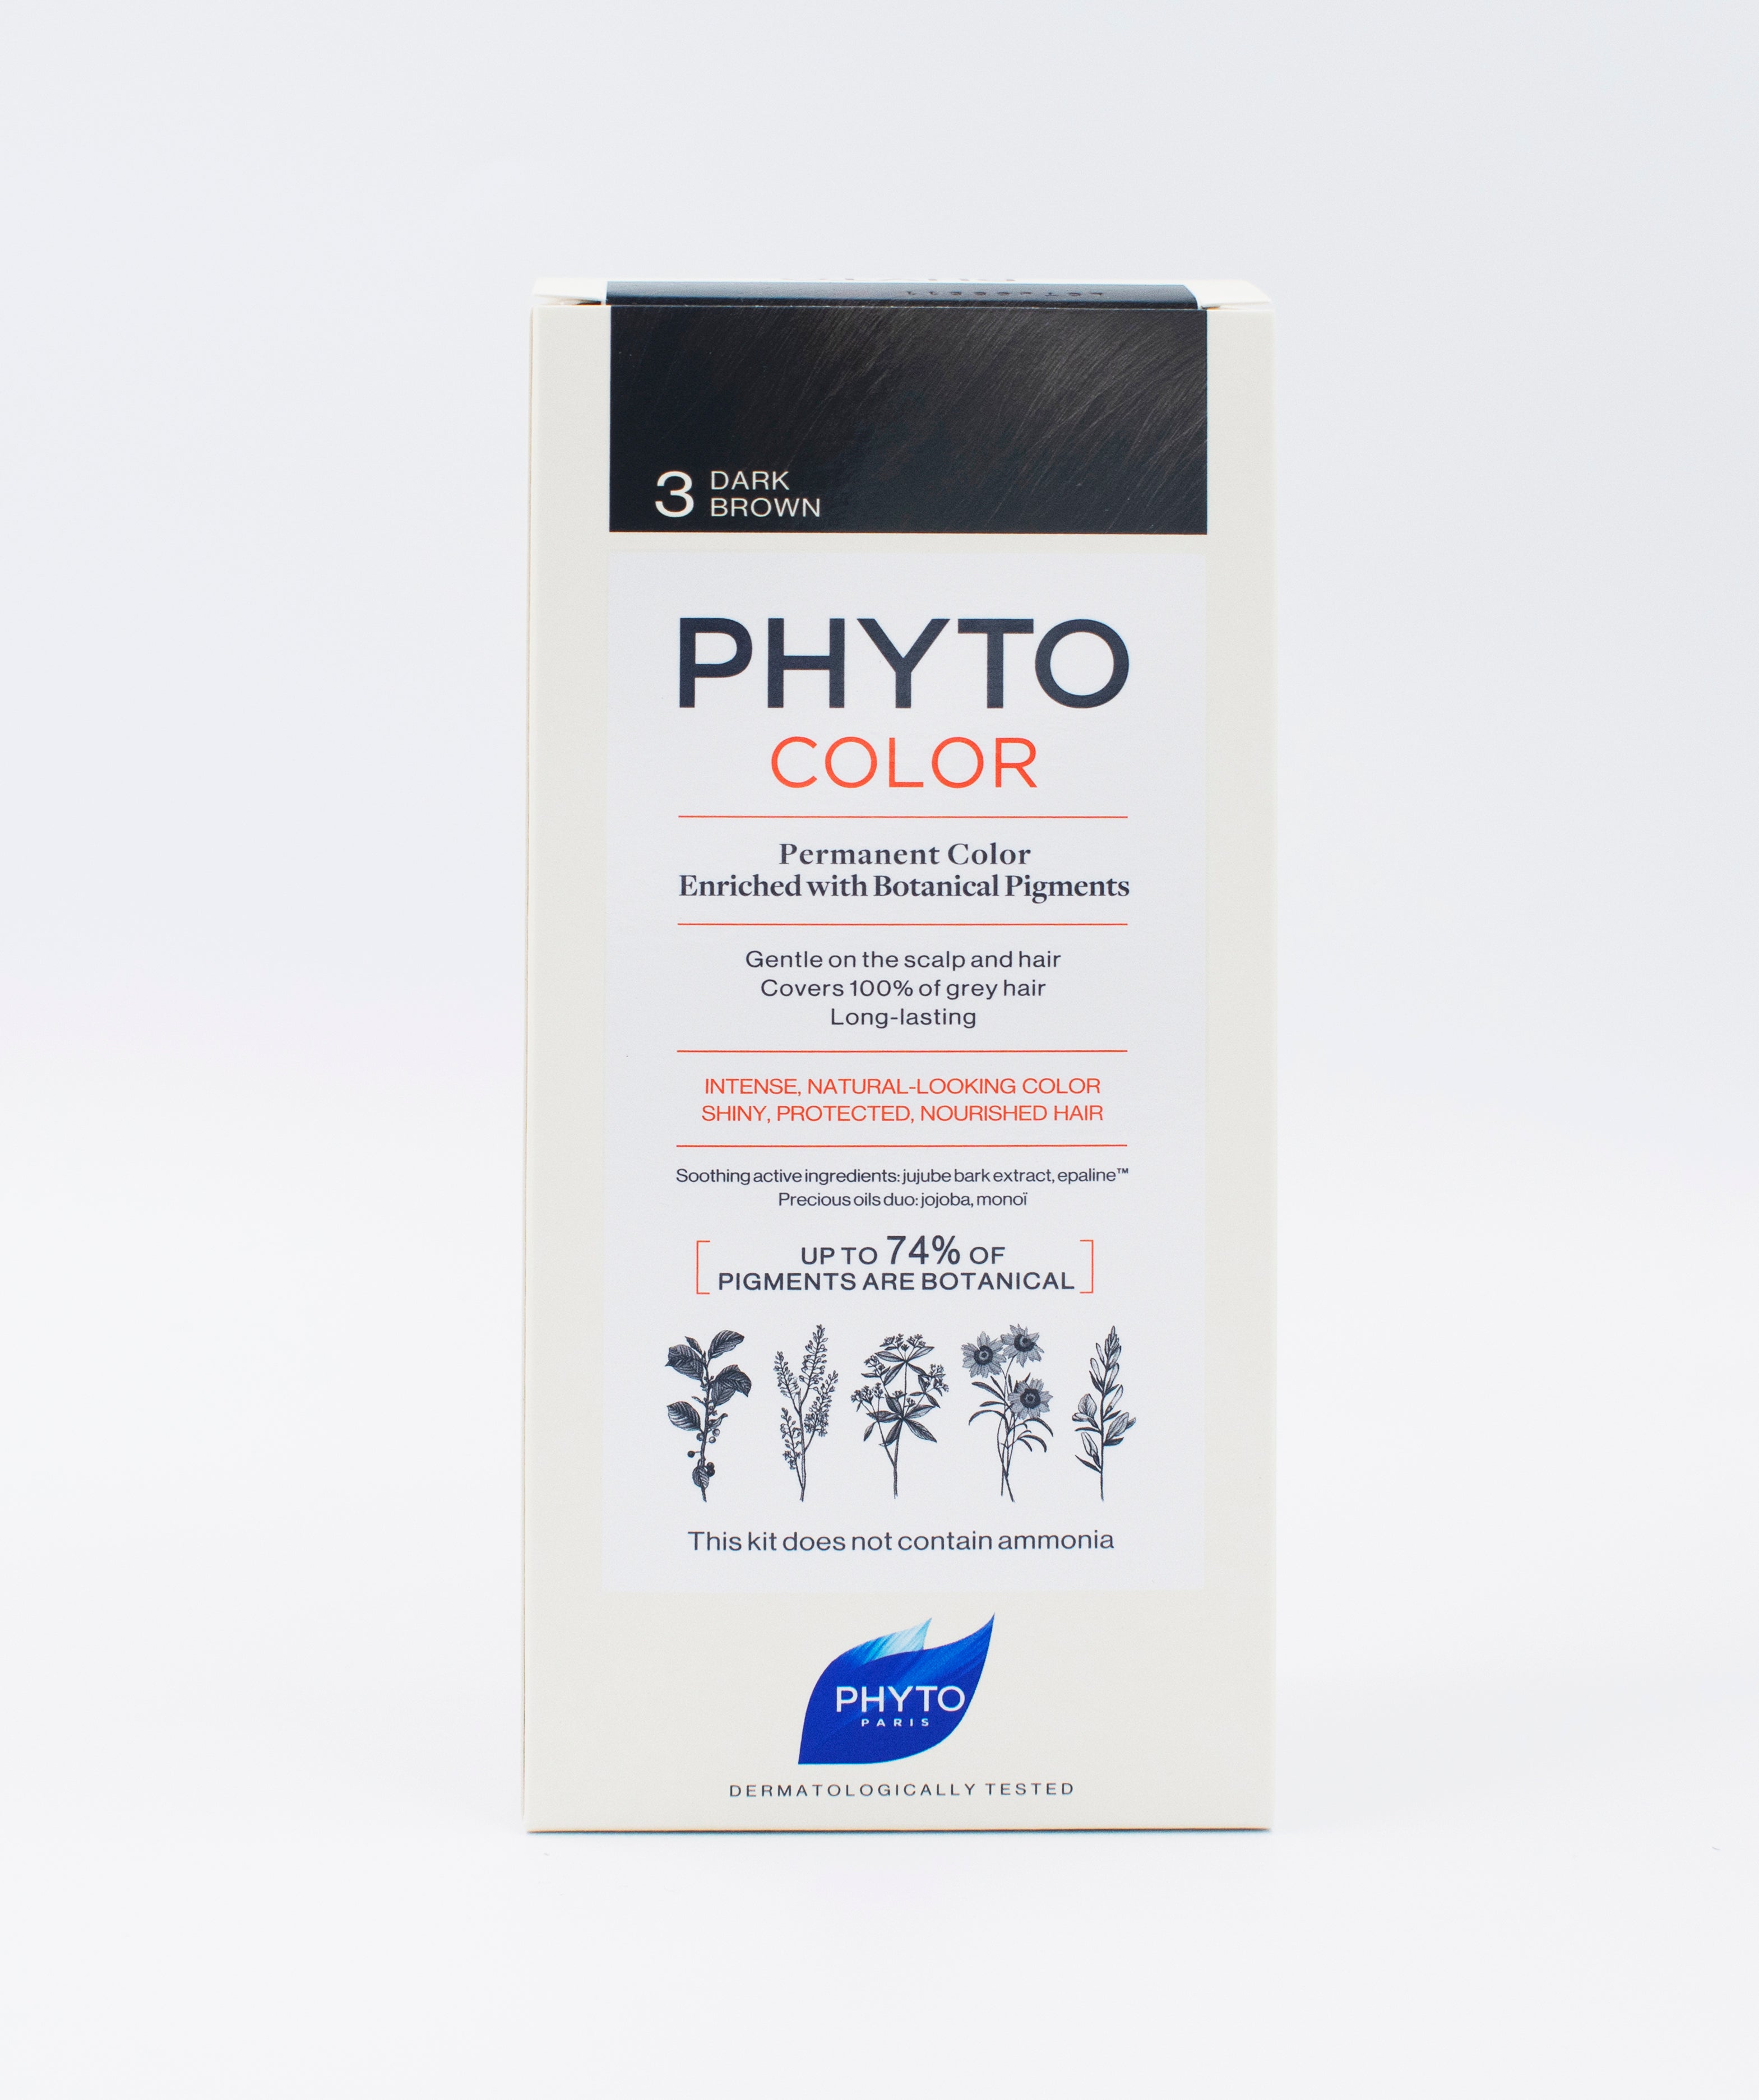 Phyto - Phytocolor 3 Dark Brown Permanent Coloring